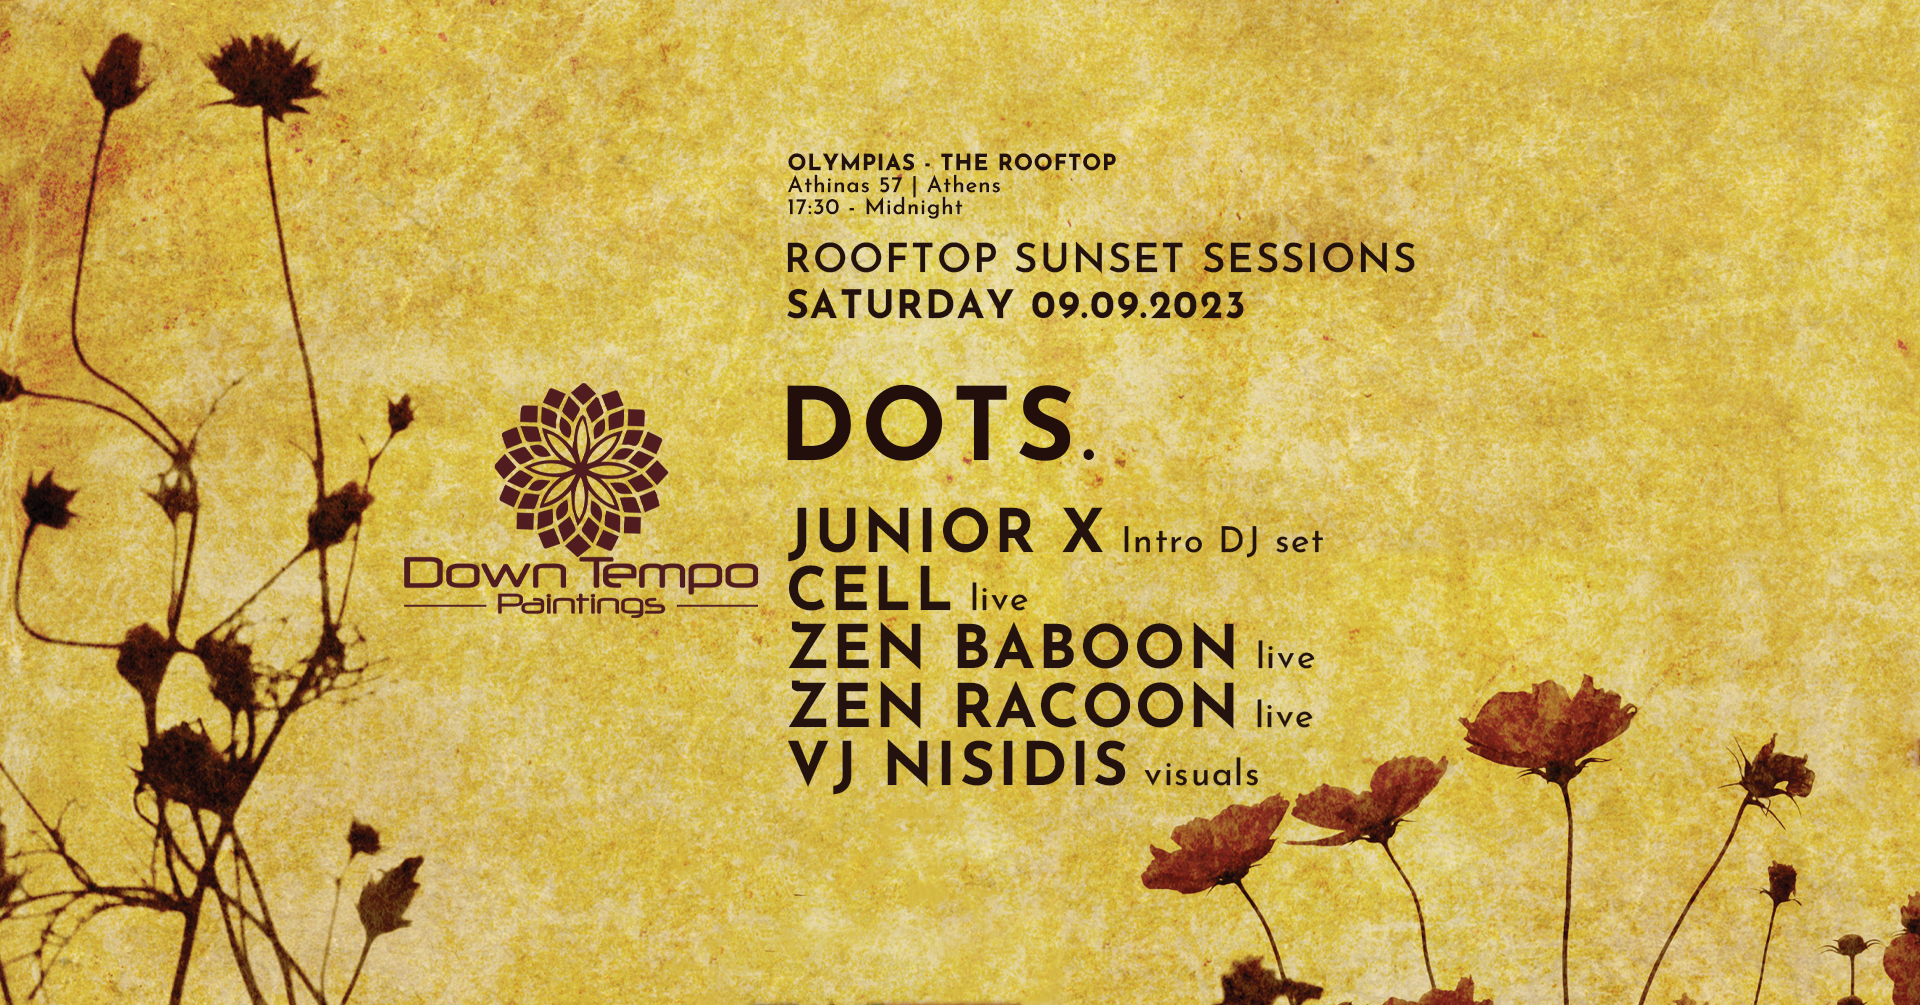 DOTS. - Cell & ZEN Baboon Live // Rooftop Sunset Session - フライヤー裏